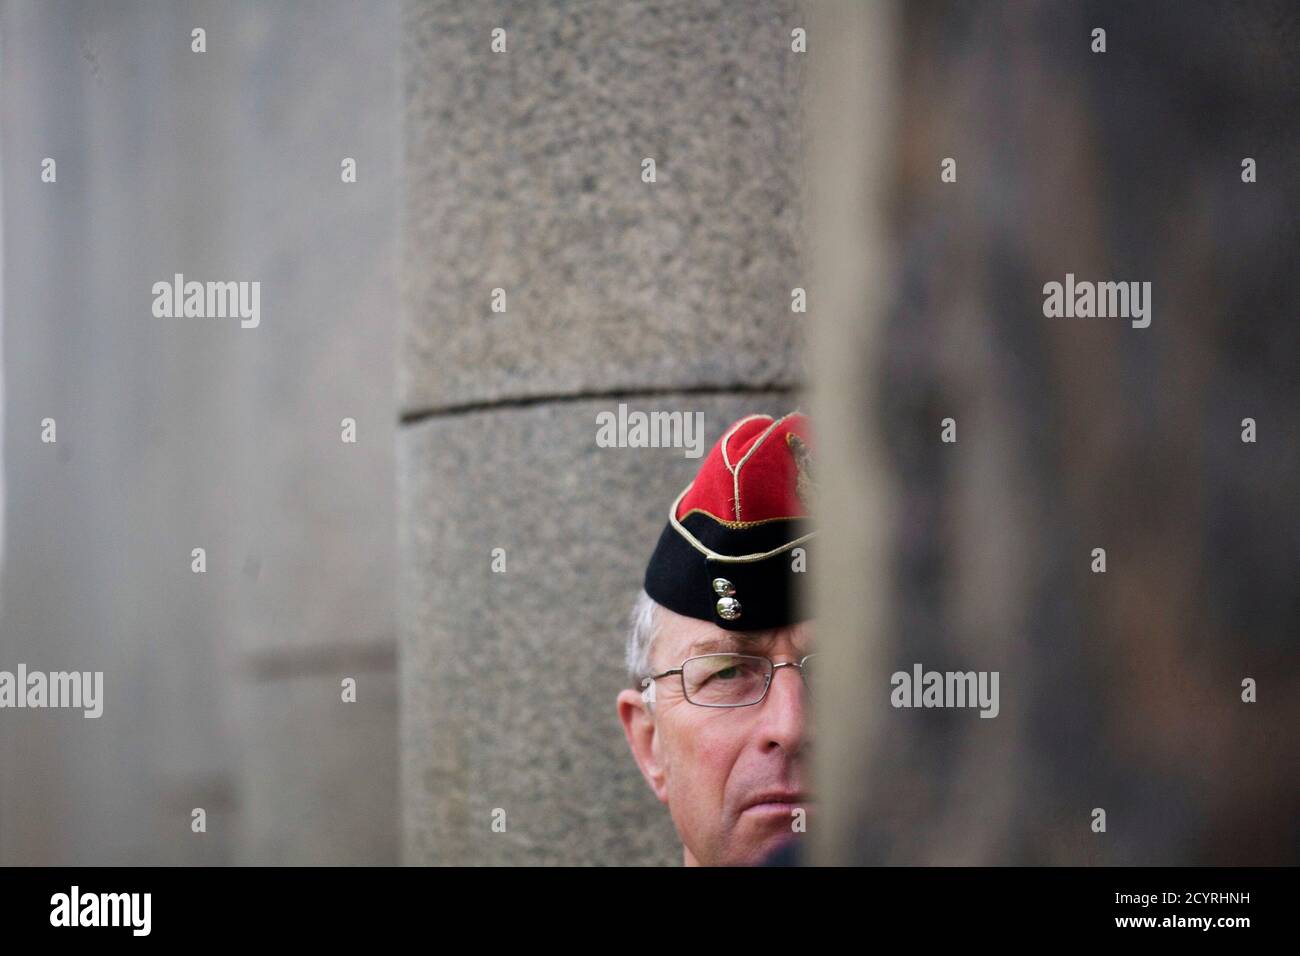 Britain's Chief of Defence Staff, General David Richards, visits Taukkyan war cemetery, on the outskirts of Yangon, June 4, 2013. The cemetery is a memorial to Commonwealth soldiers who died in Burma, presently known as Myanmar, during World War Two. REUTERS/Minzayar (MYANMAR - Tags: MILITARY POLITICS CONFLICT) Stock Photo